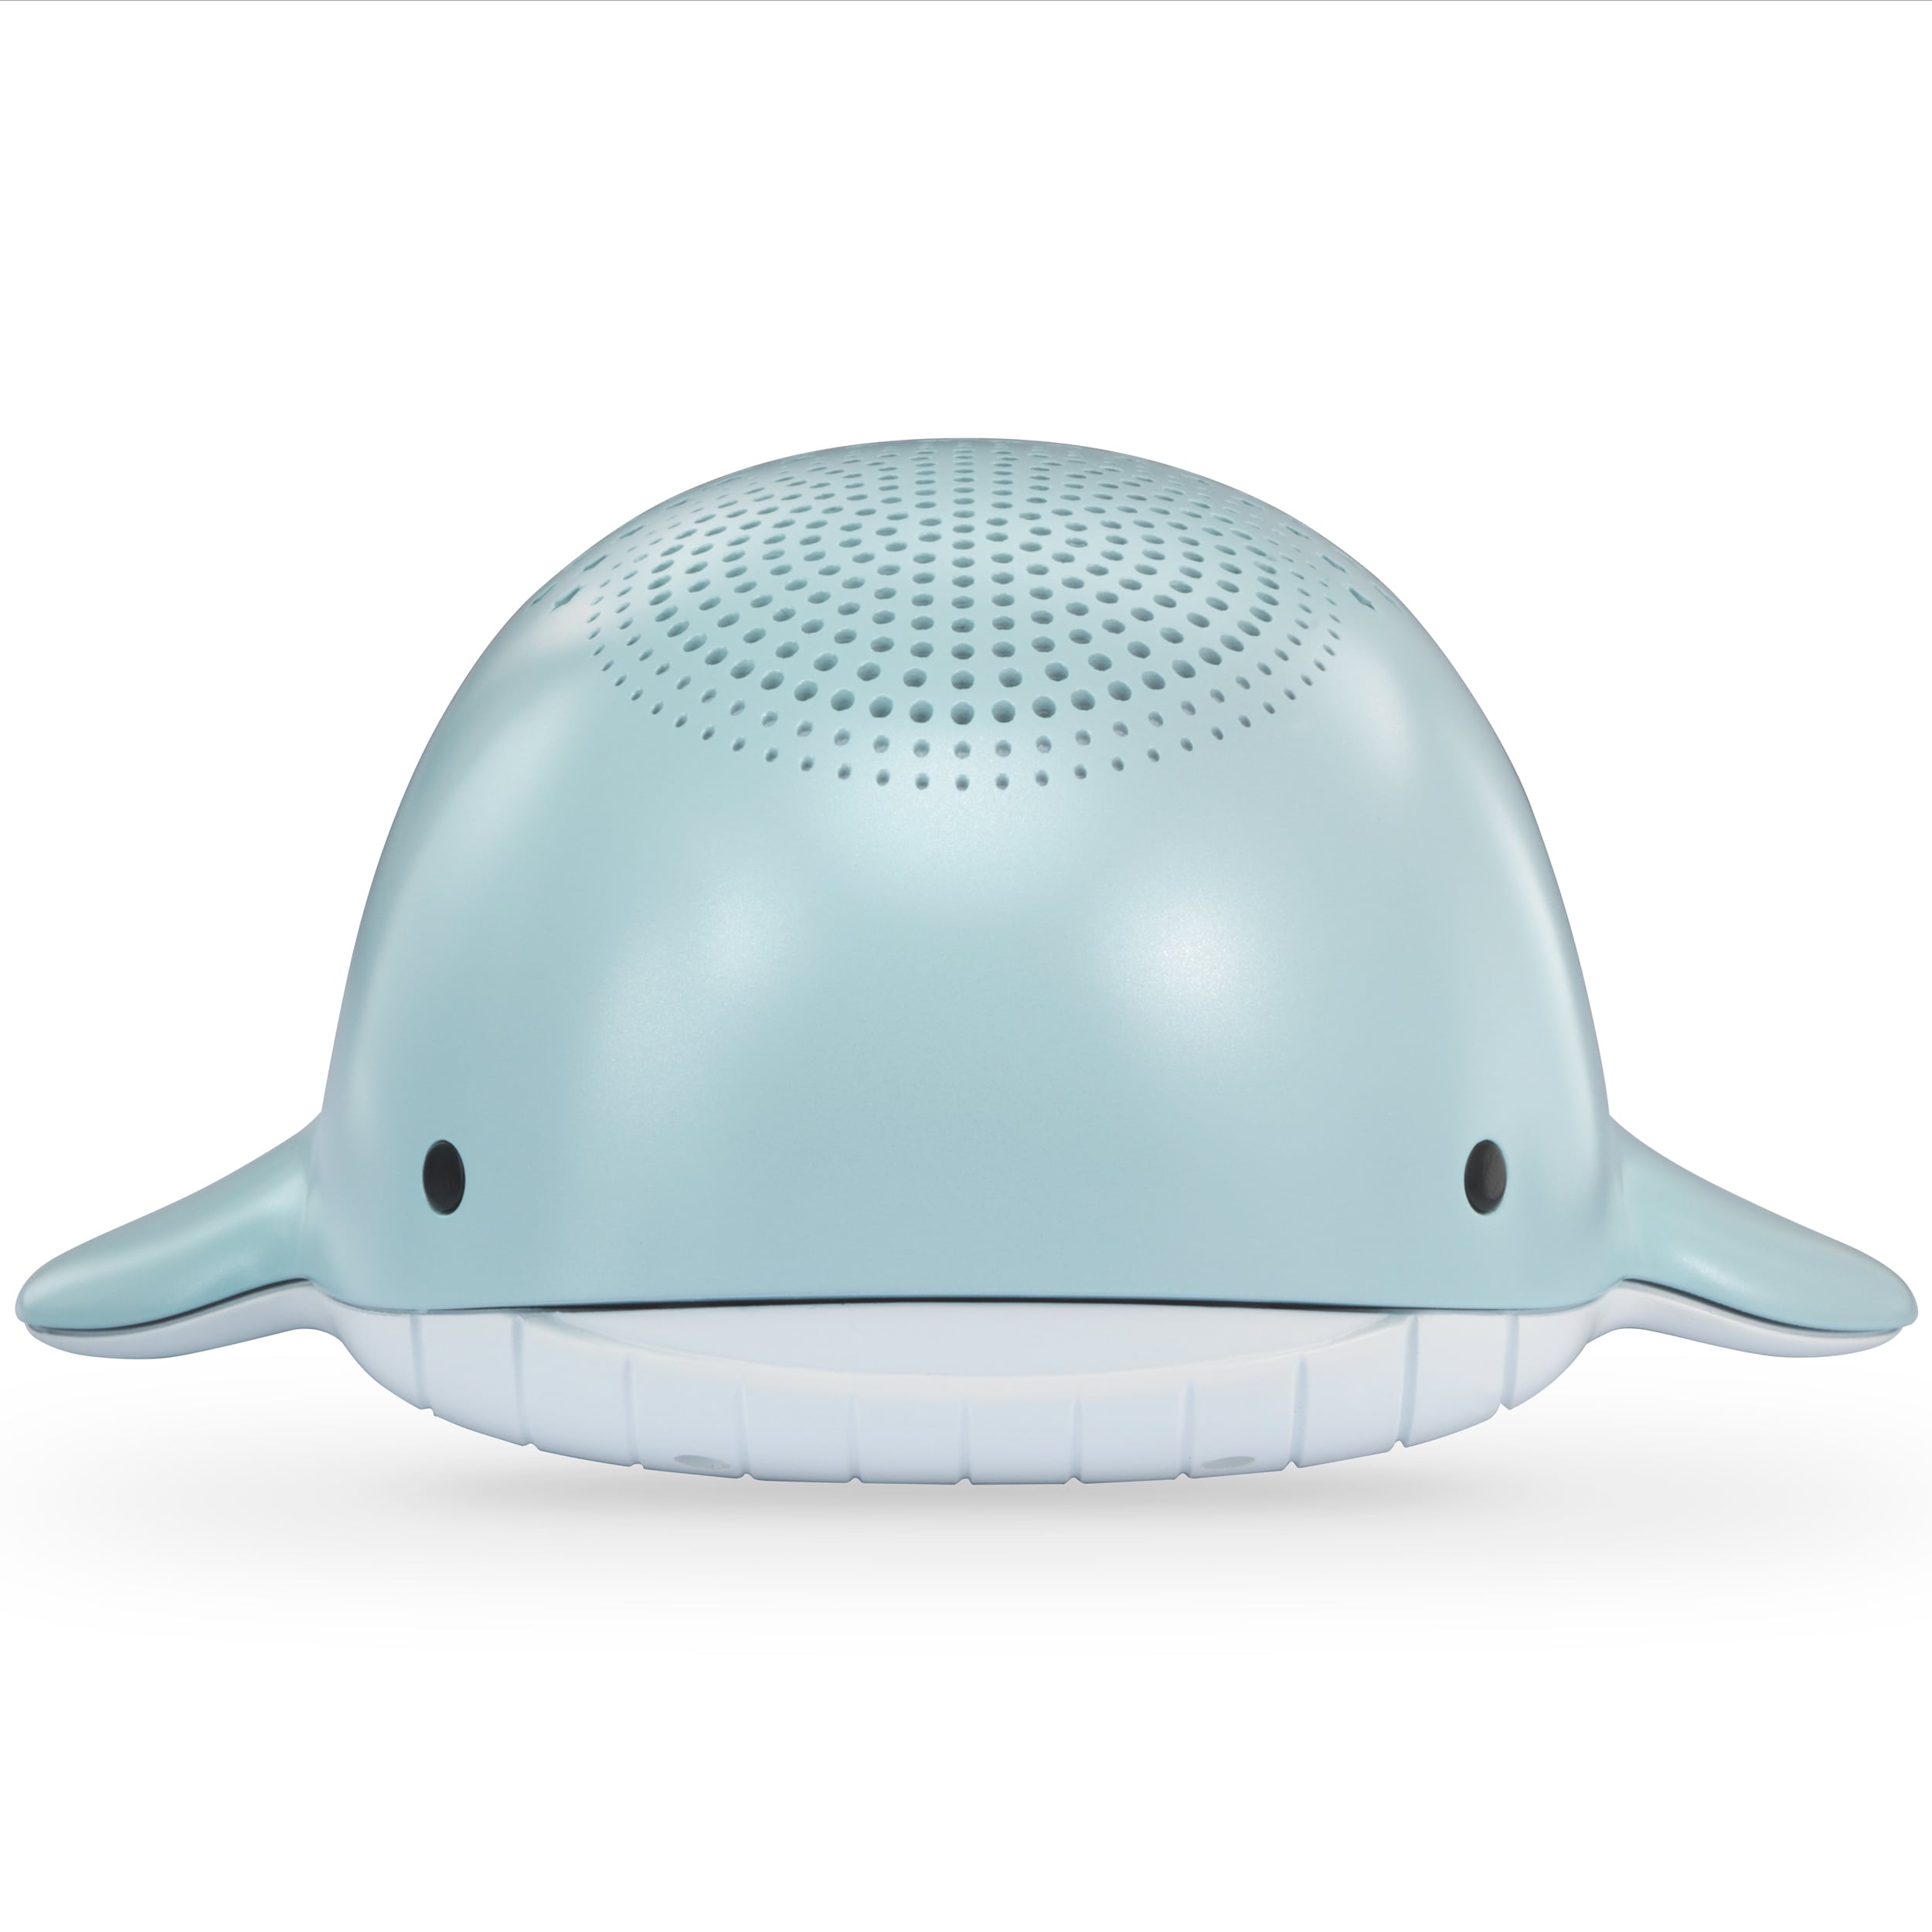 Wyatt the Whale® Storytelling Soother